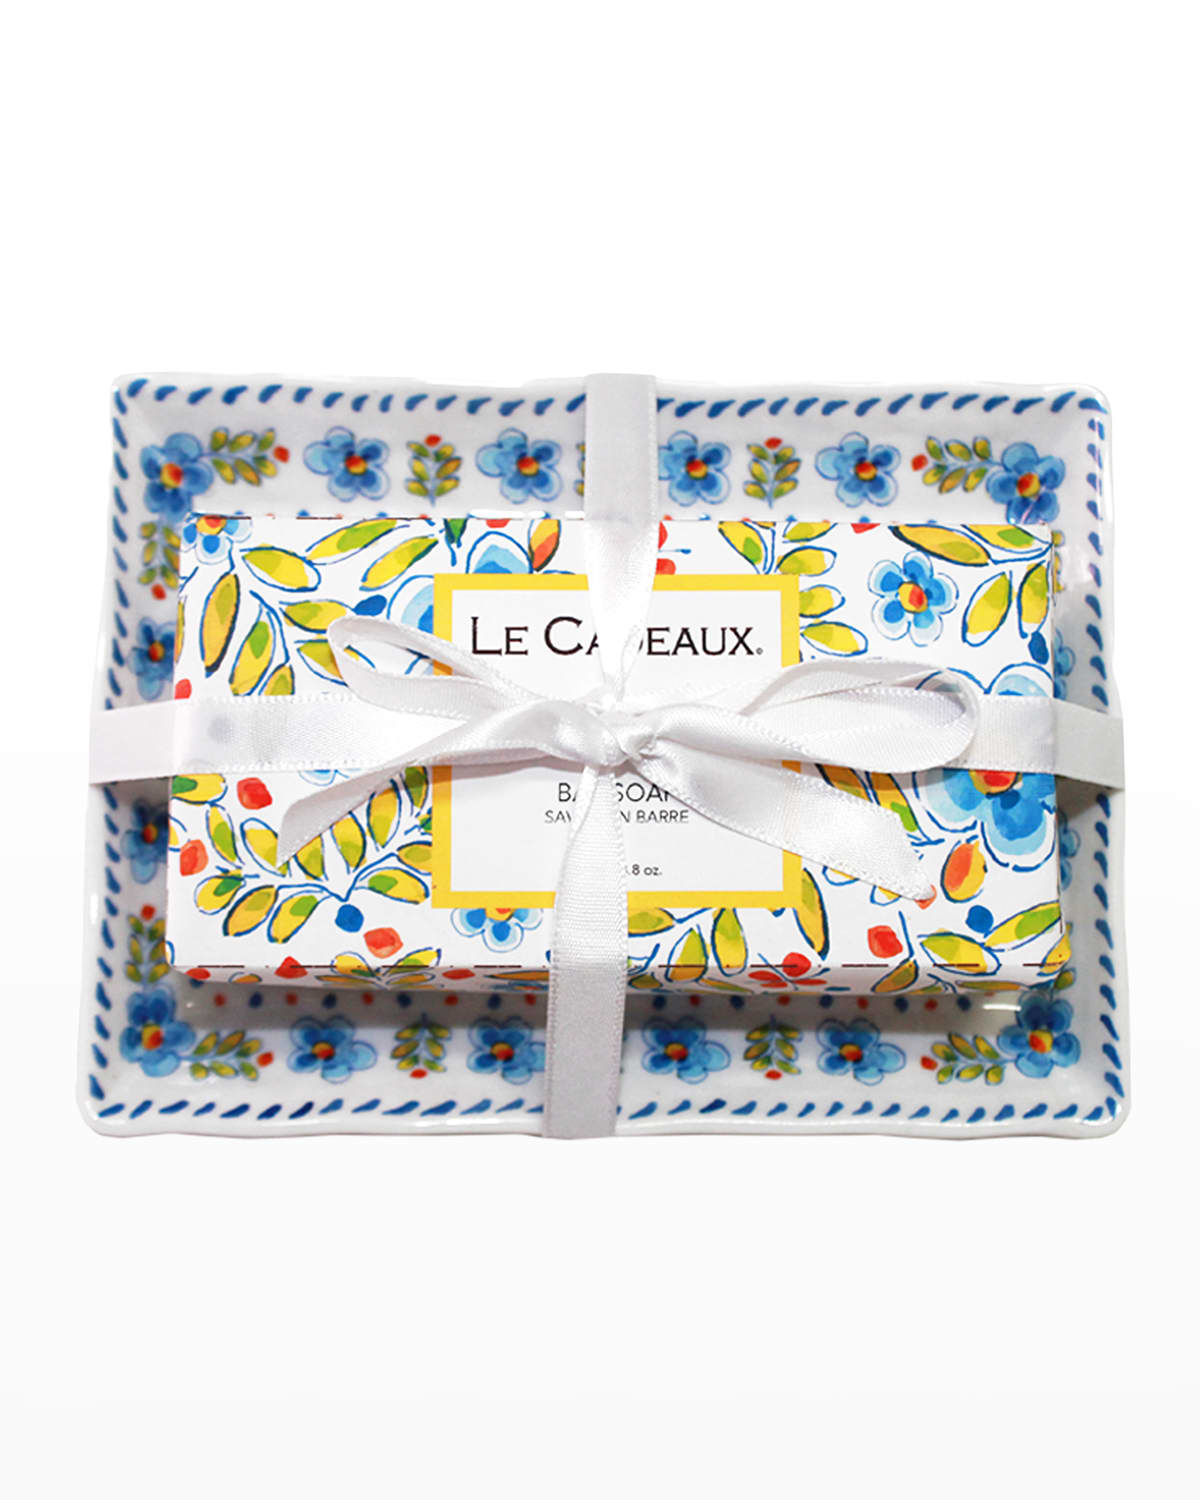 Le Cadeaux Bar Gift Soap In Rosemary Mint